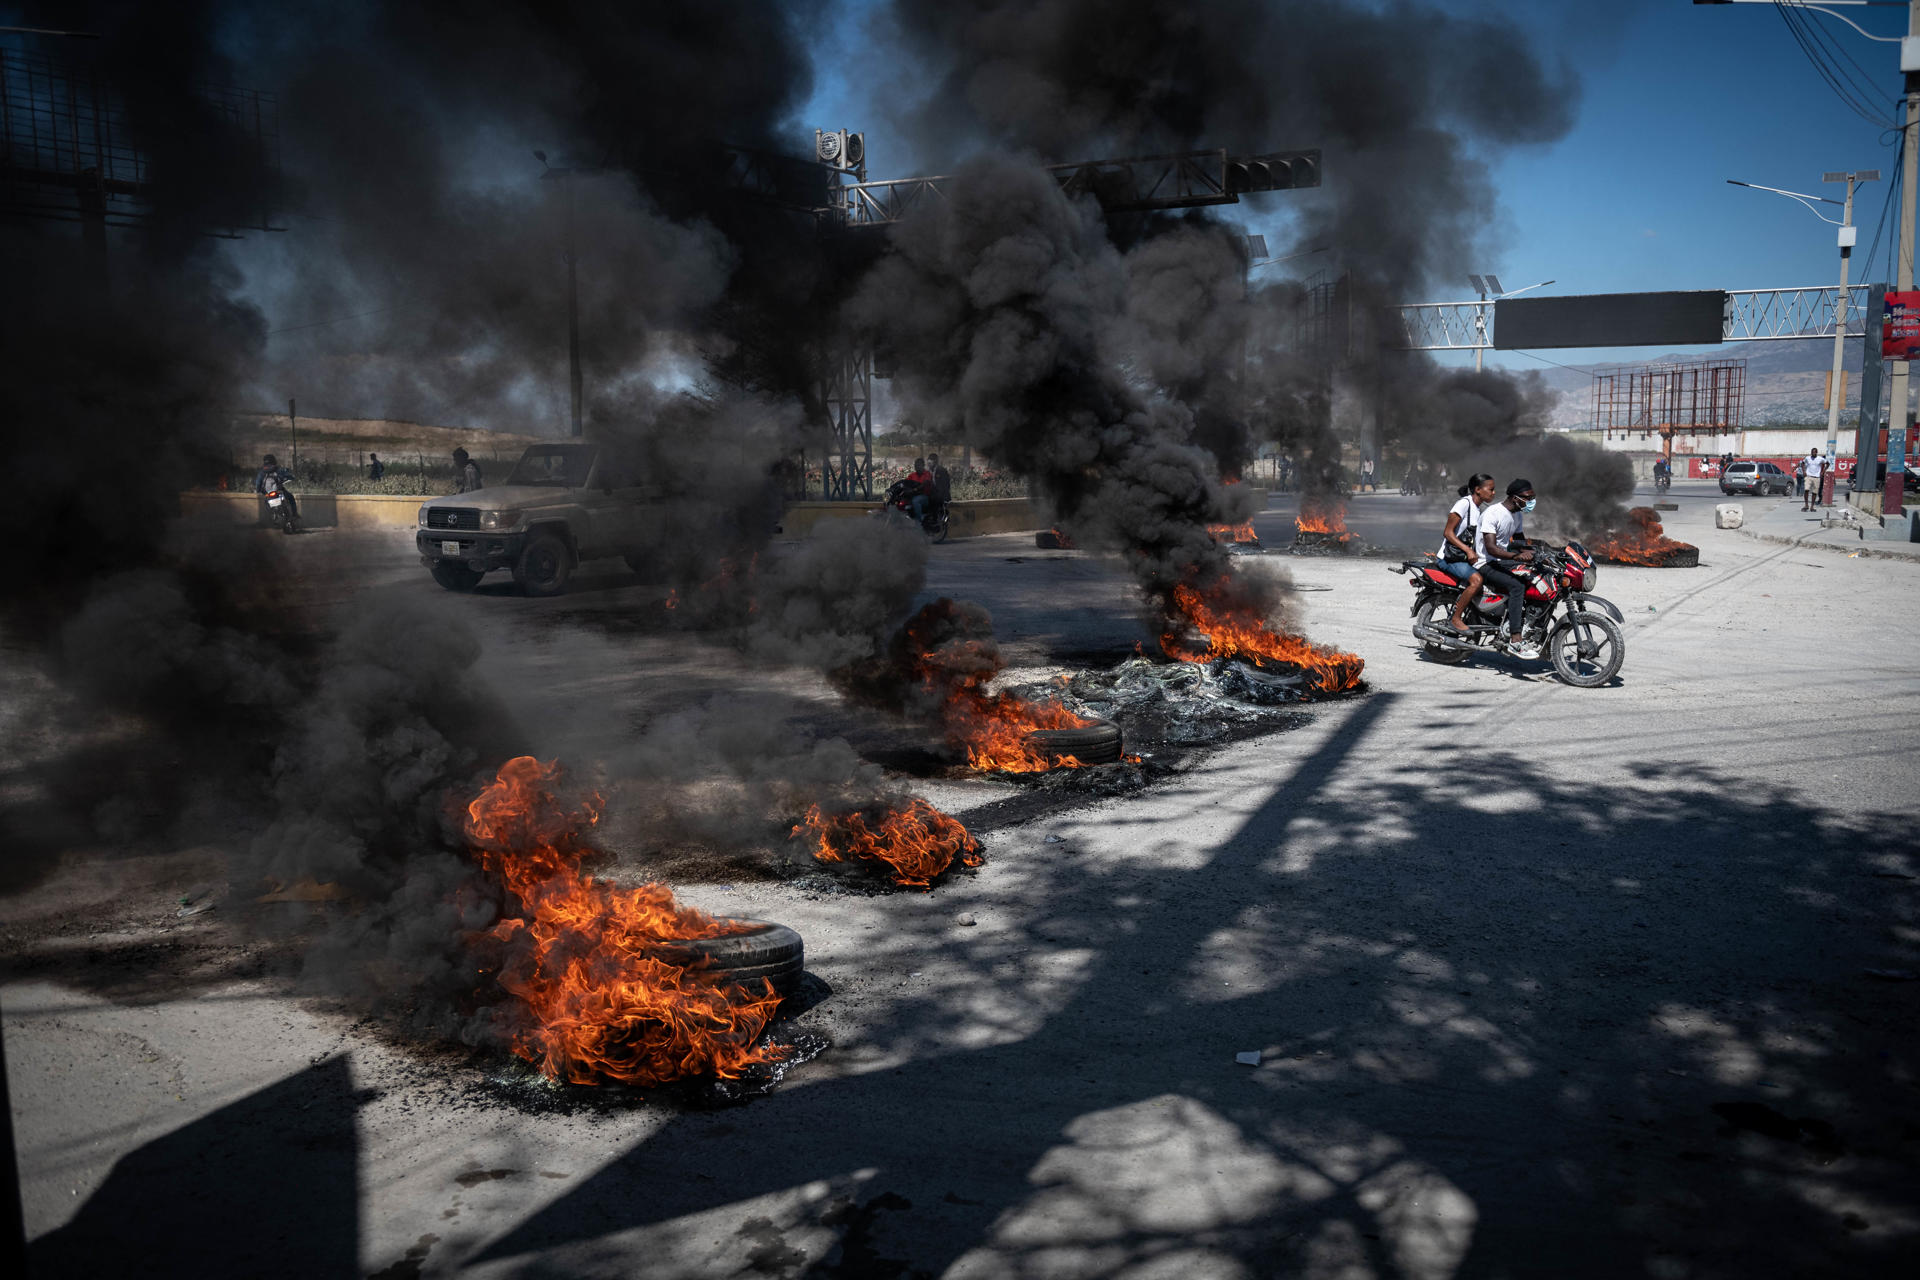 Residents set piles of tires on fire during a protest in Port-au-Prince. EFE/Johnson Sabin